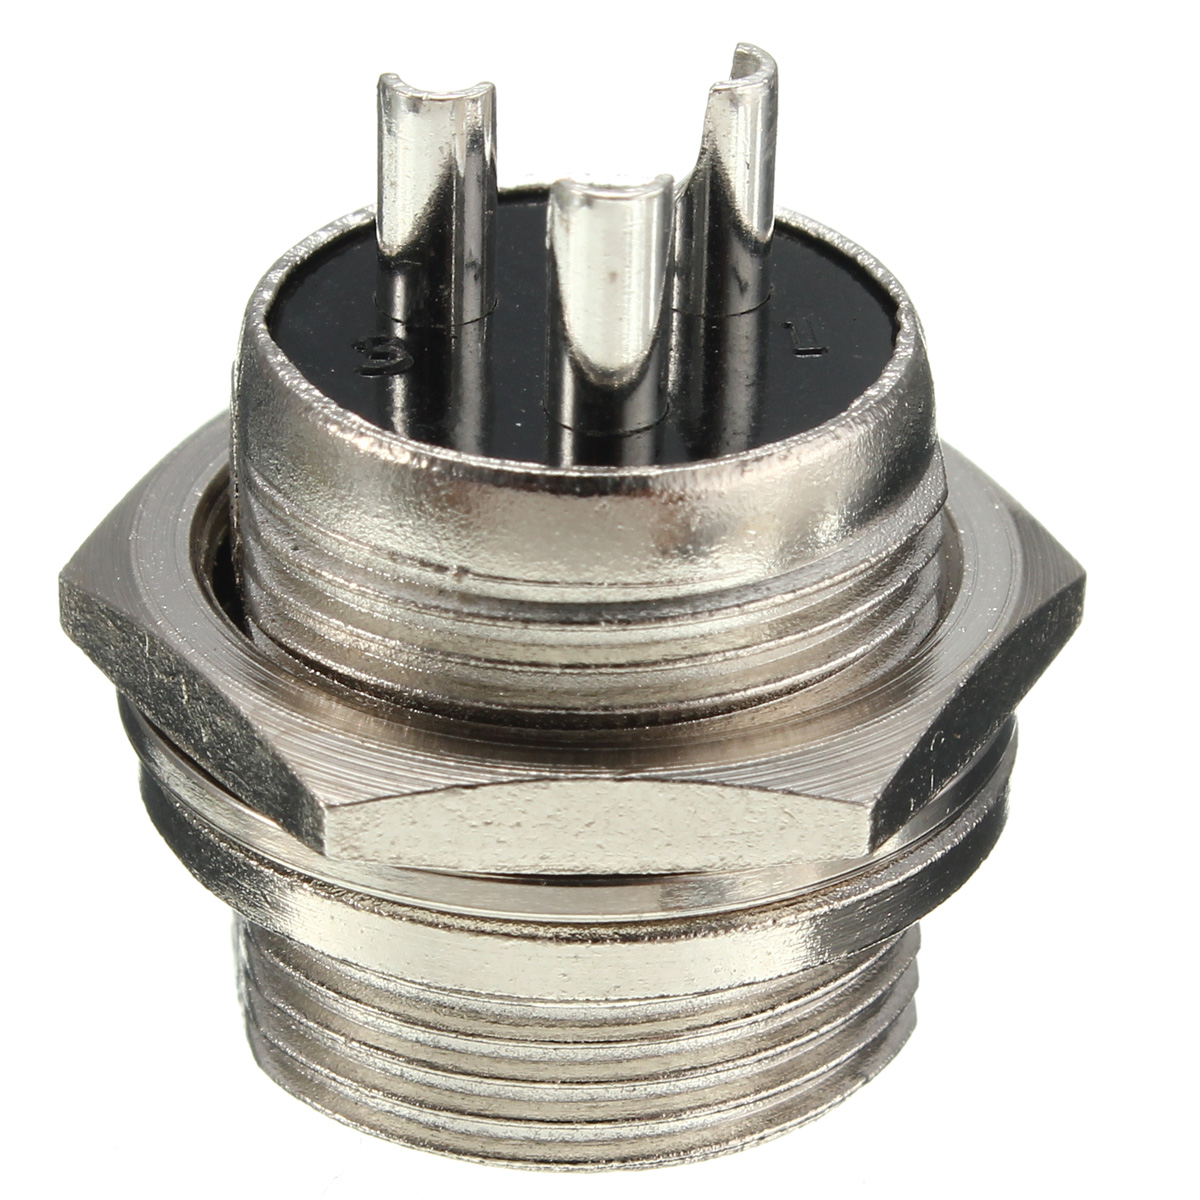 M16-2345678-Pin-Screw-Type-Electrical-Aviation-Plug-Socket-Connector-Aviation-Connector-Plug-1333374-7